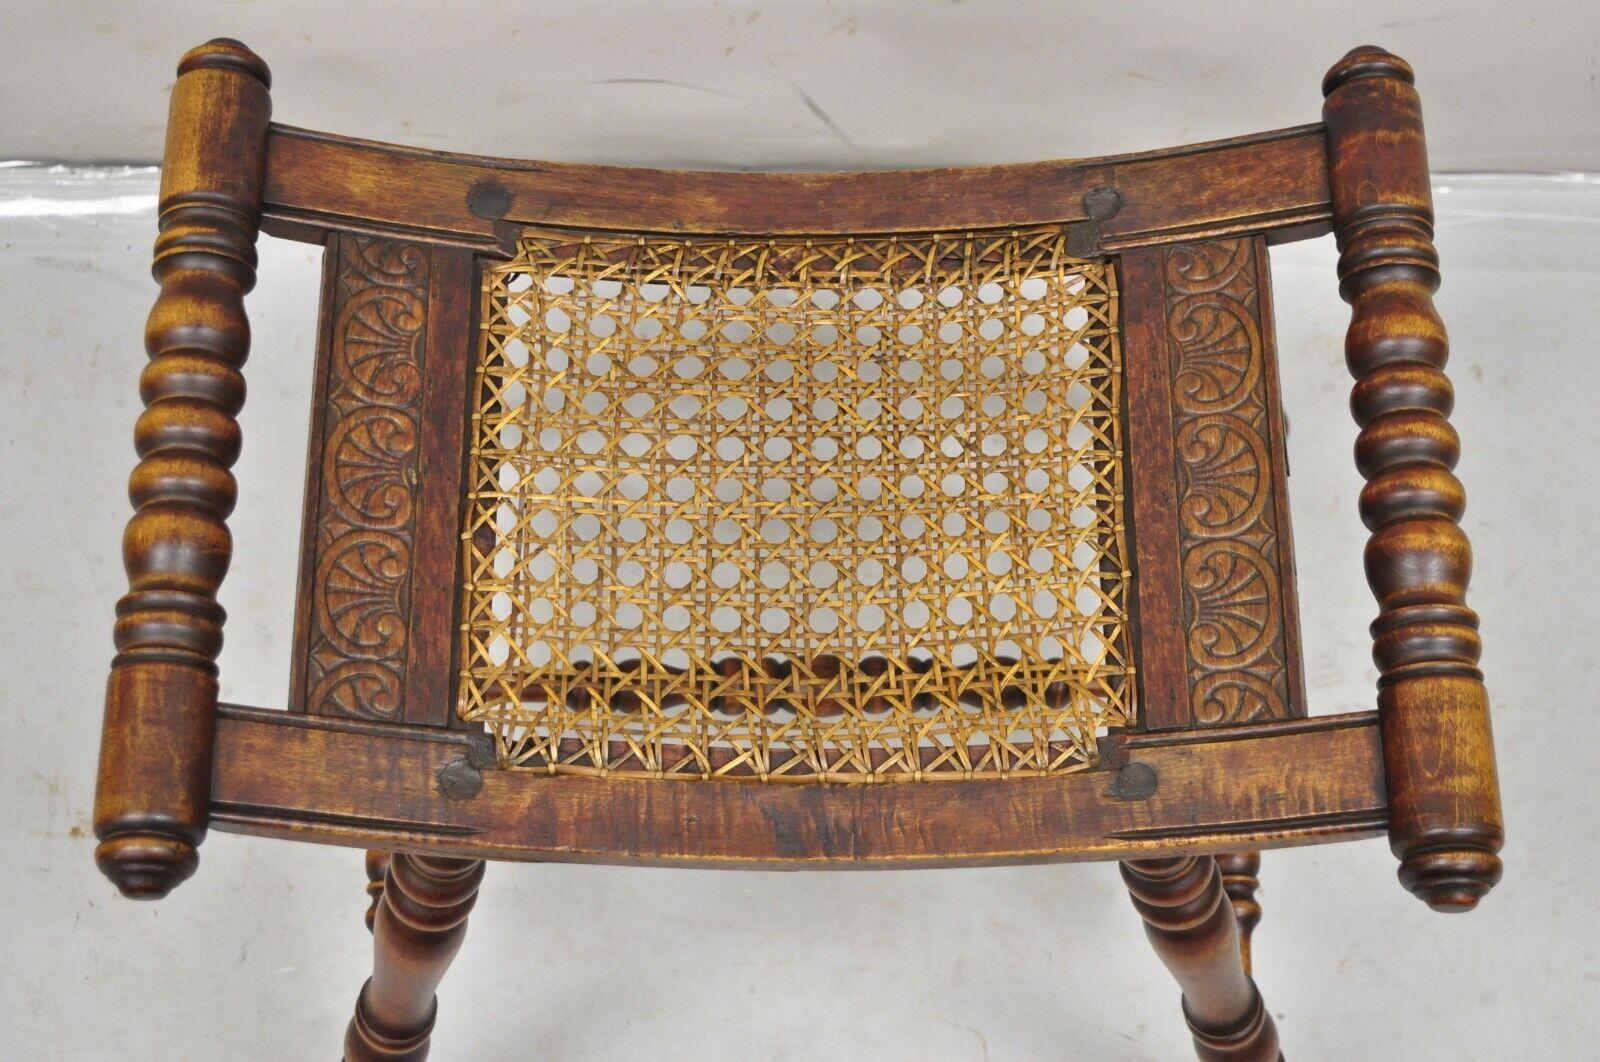 Antique English Jacobean Turn Carved Walnut Cane Seat Spindle Stool In Good Condition For Sale In Philadelphia, PA